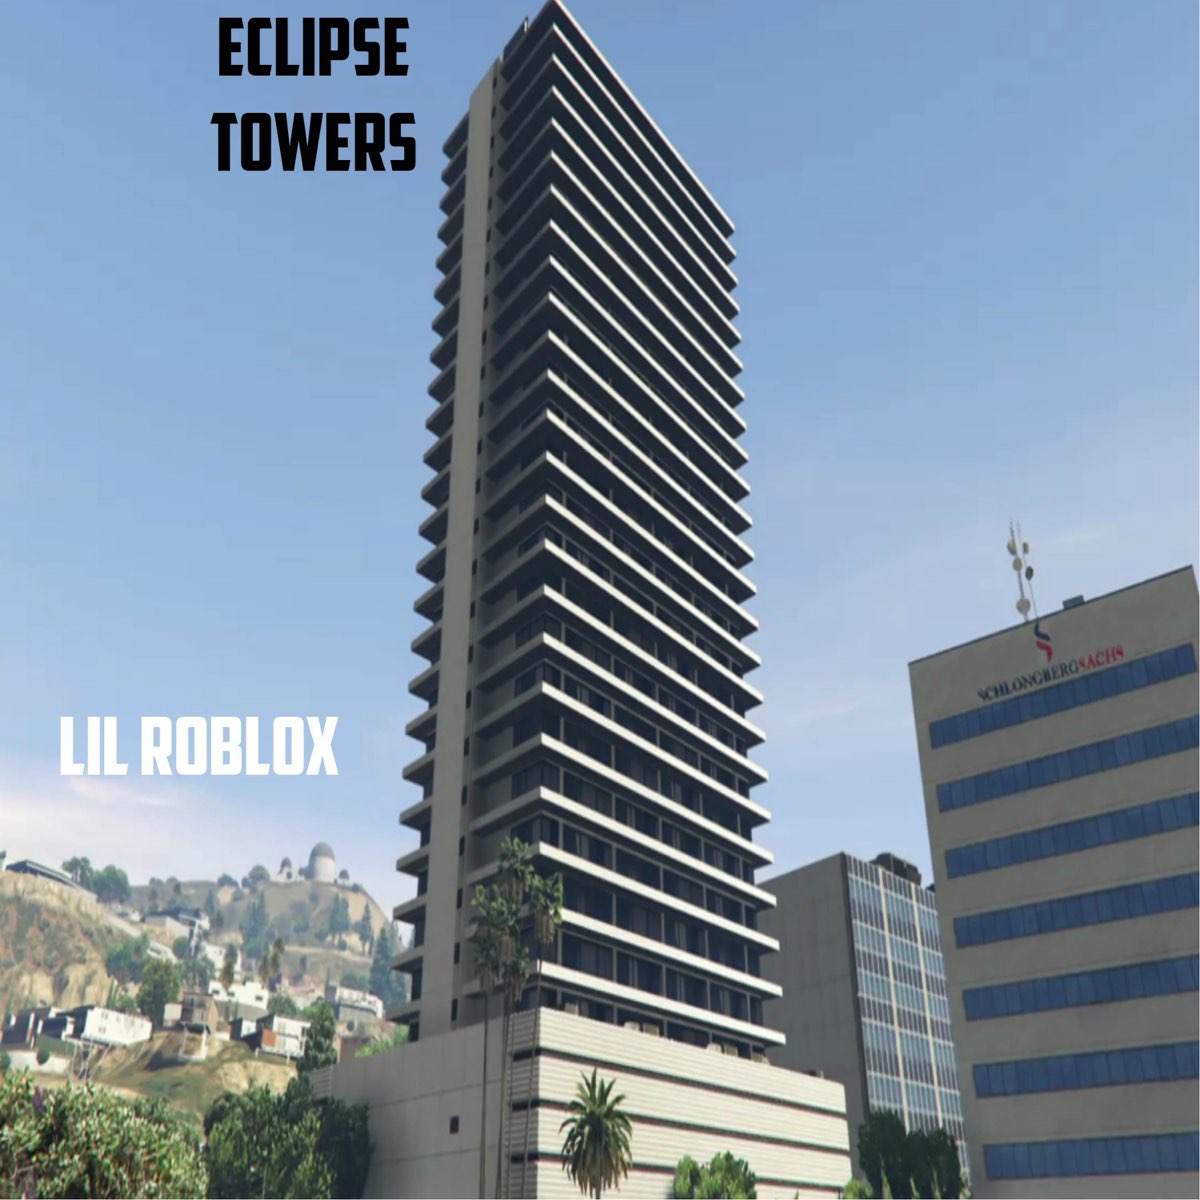 Eclipse tower in gta 5 фото 115